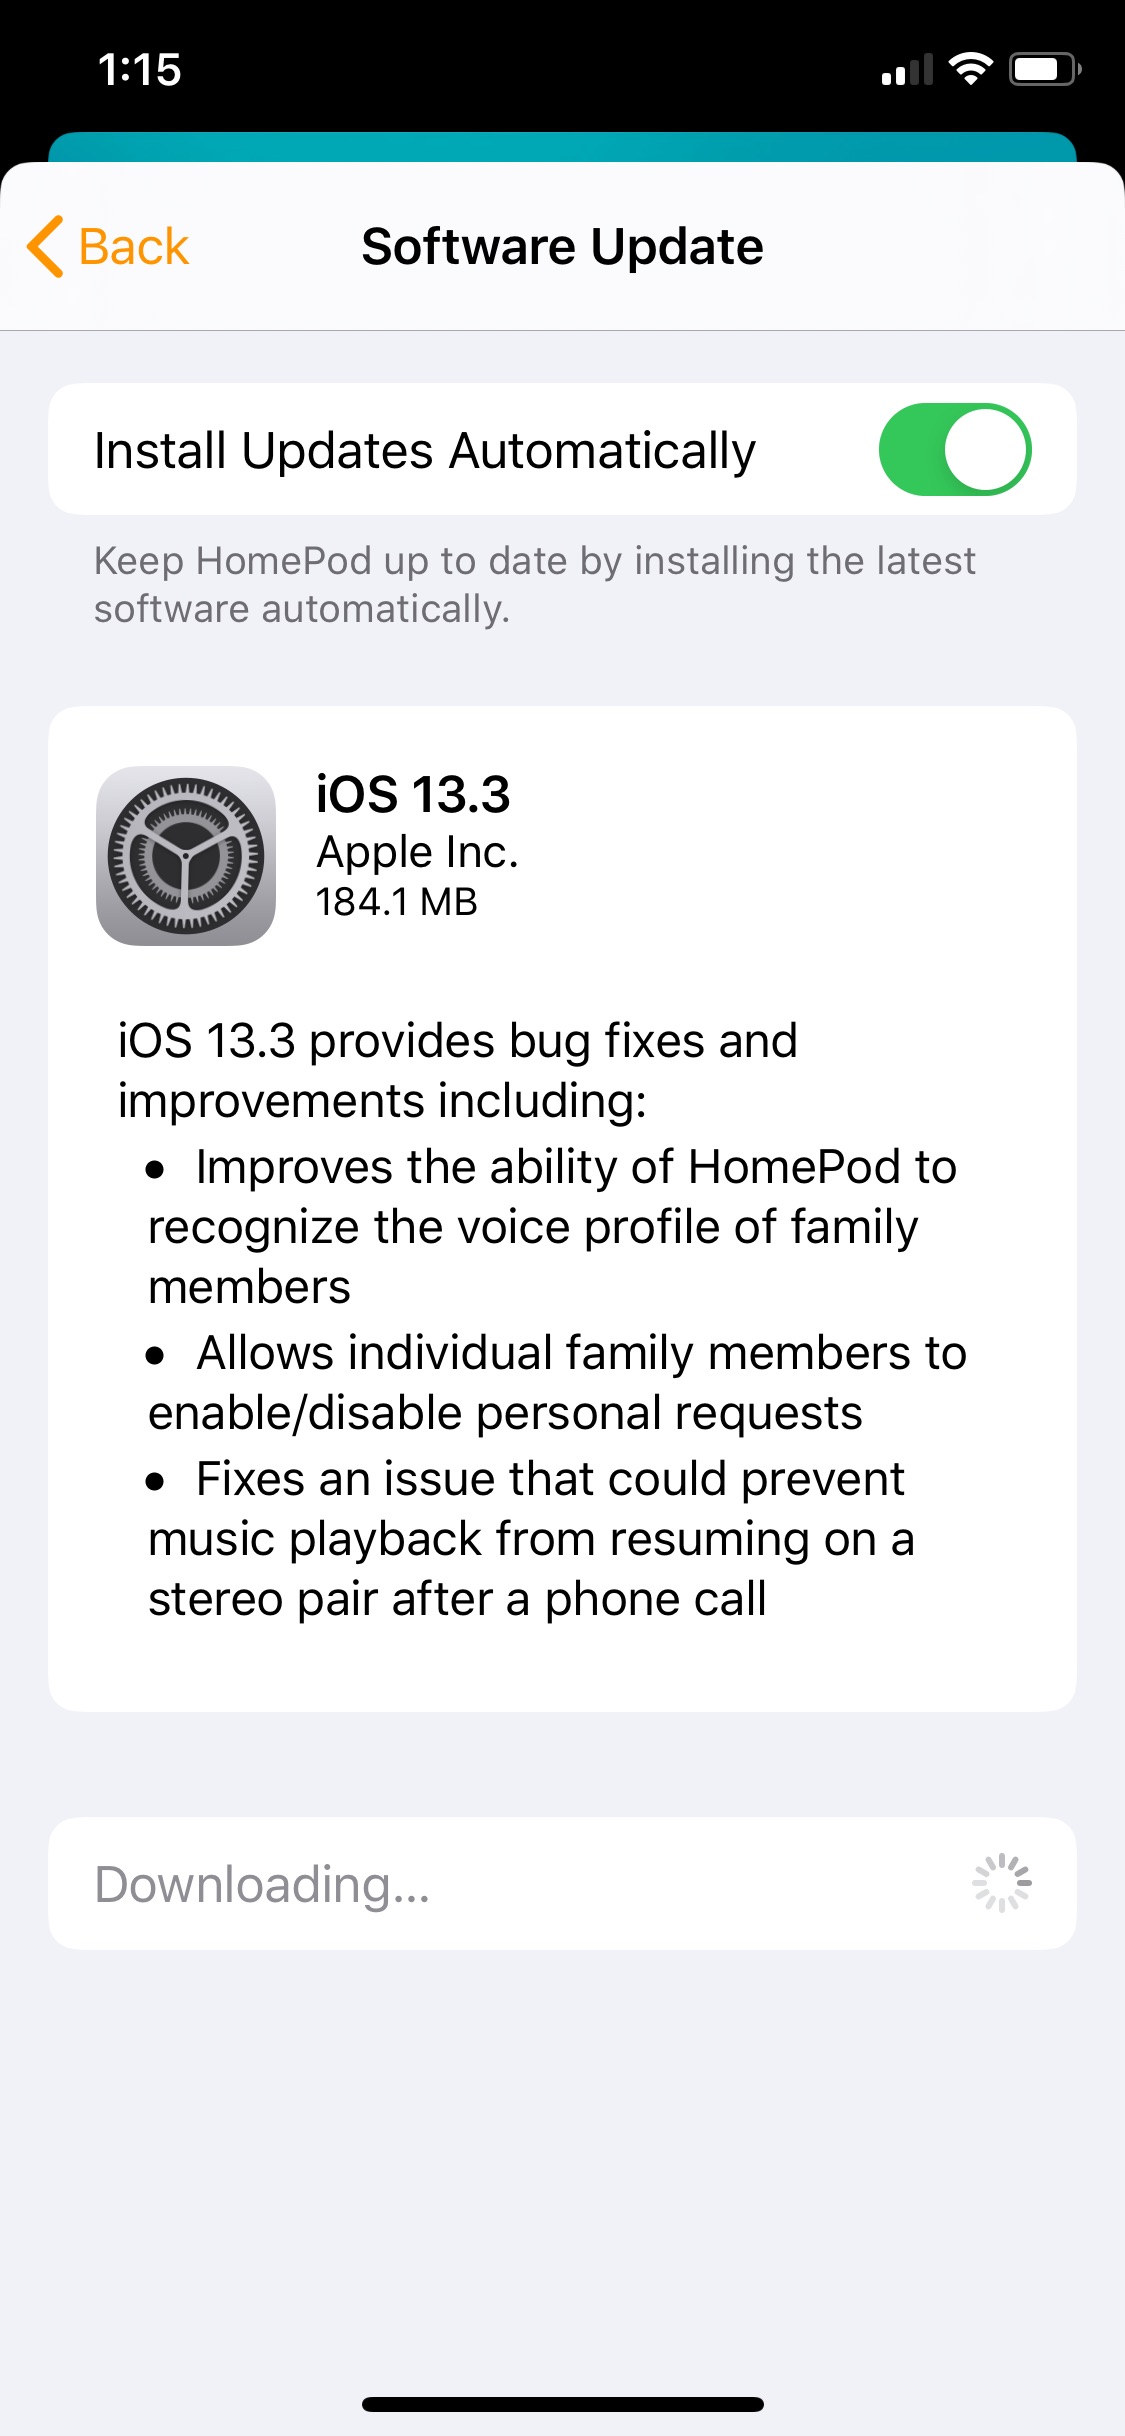 Apple Updates HomePod With Bug Fixes, Better Voice Recognition of Family Members, More